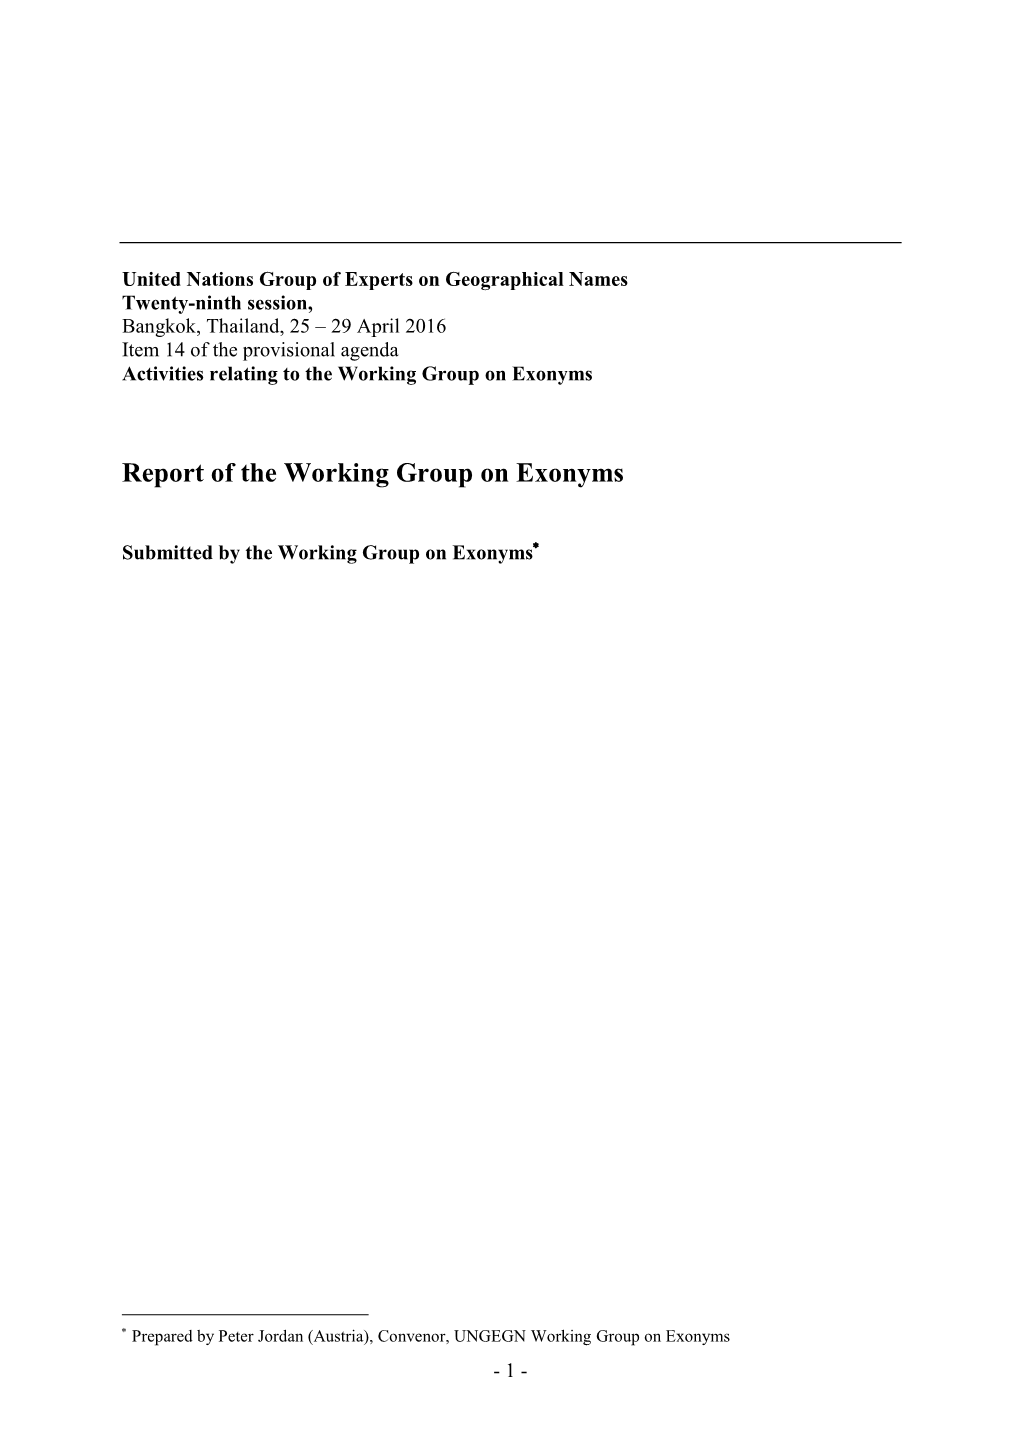 Report of the Working Group on Exonyms UNGEGN